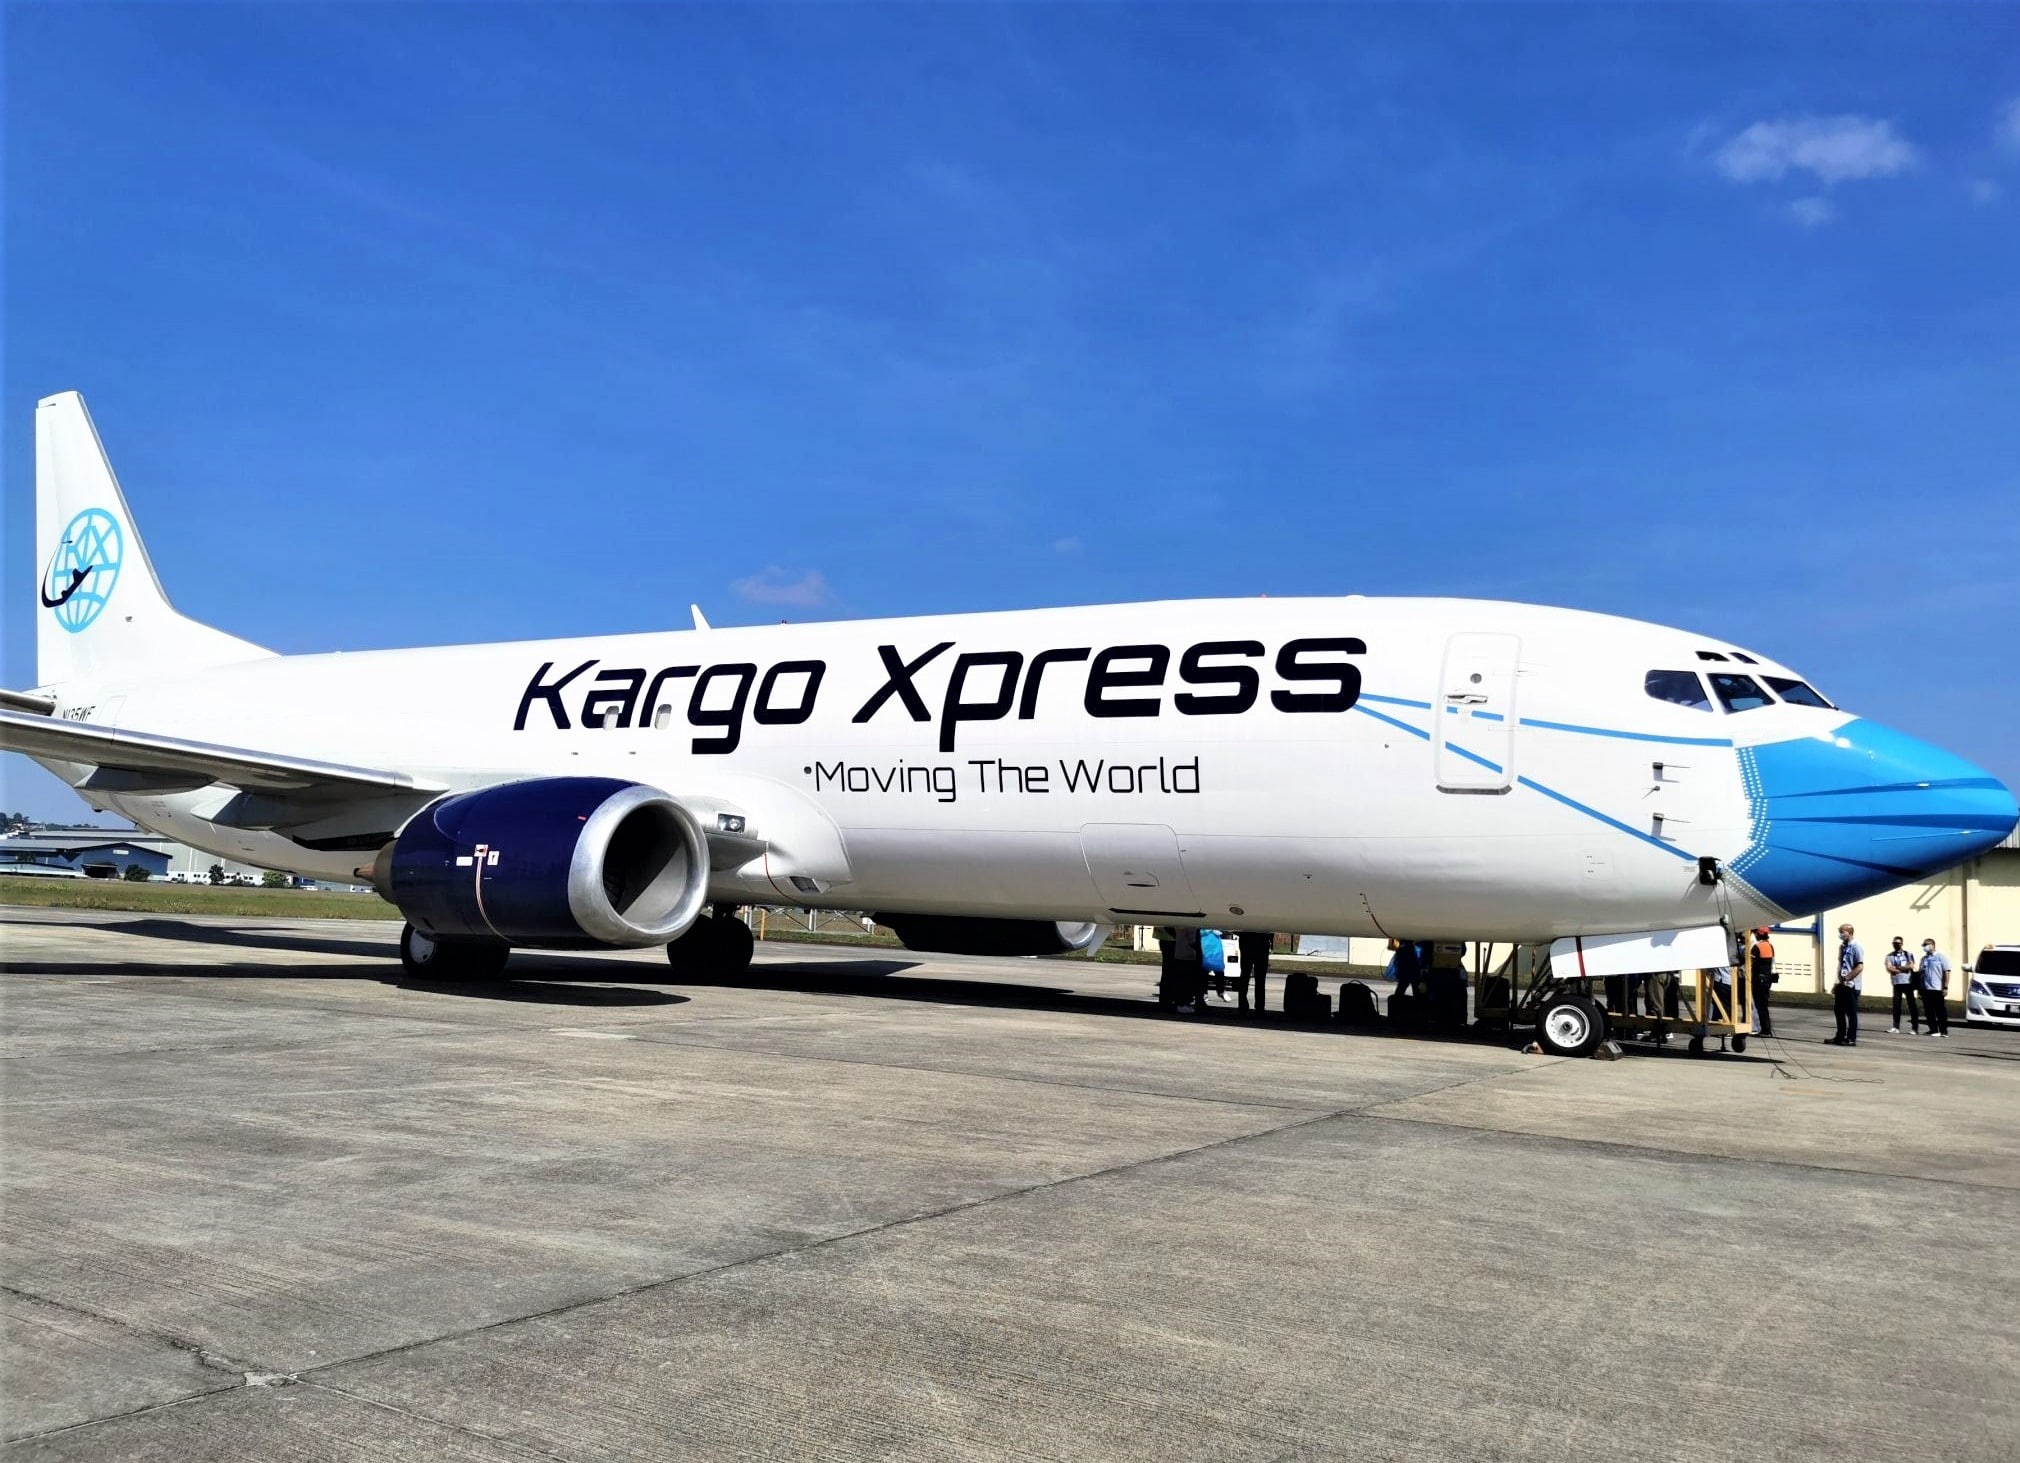 Kargo Xpress targets 737F and 767F additions | Cargo Facts